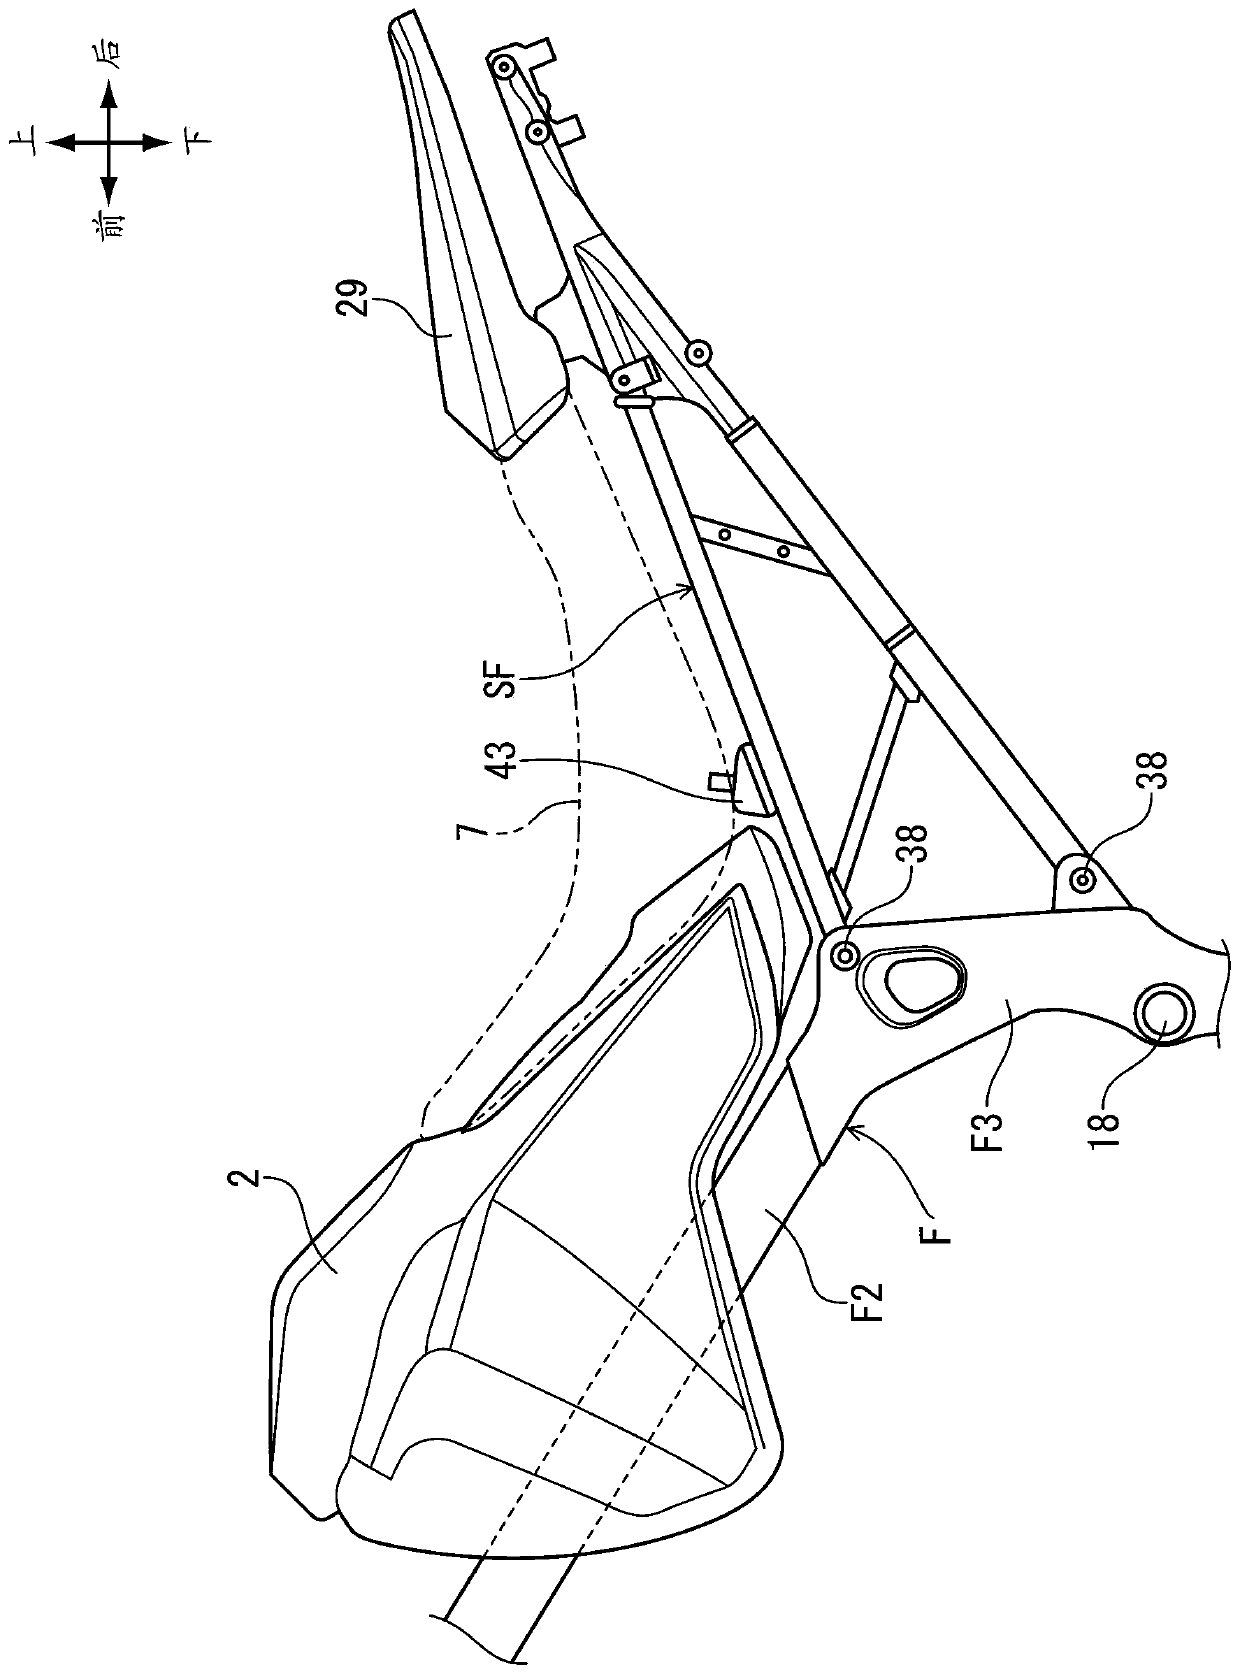 Seat frame for motorcycle